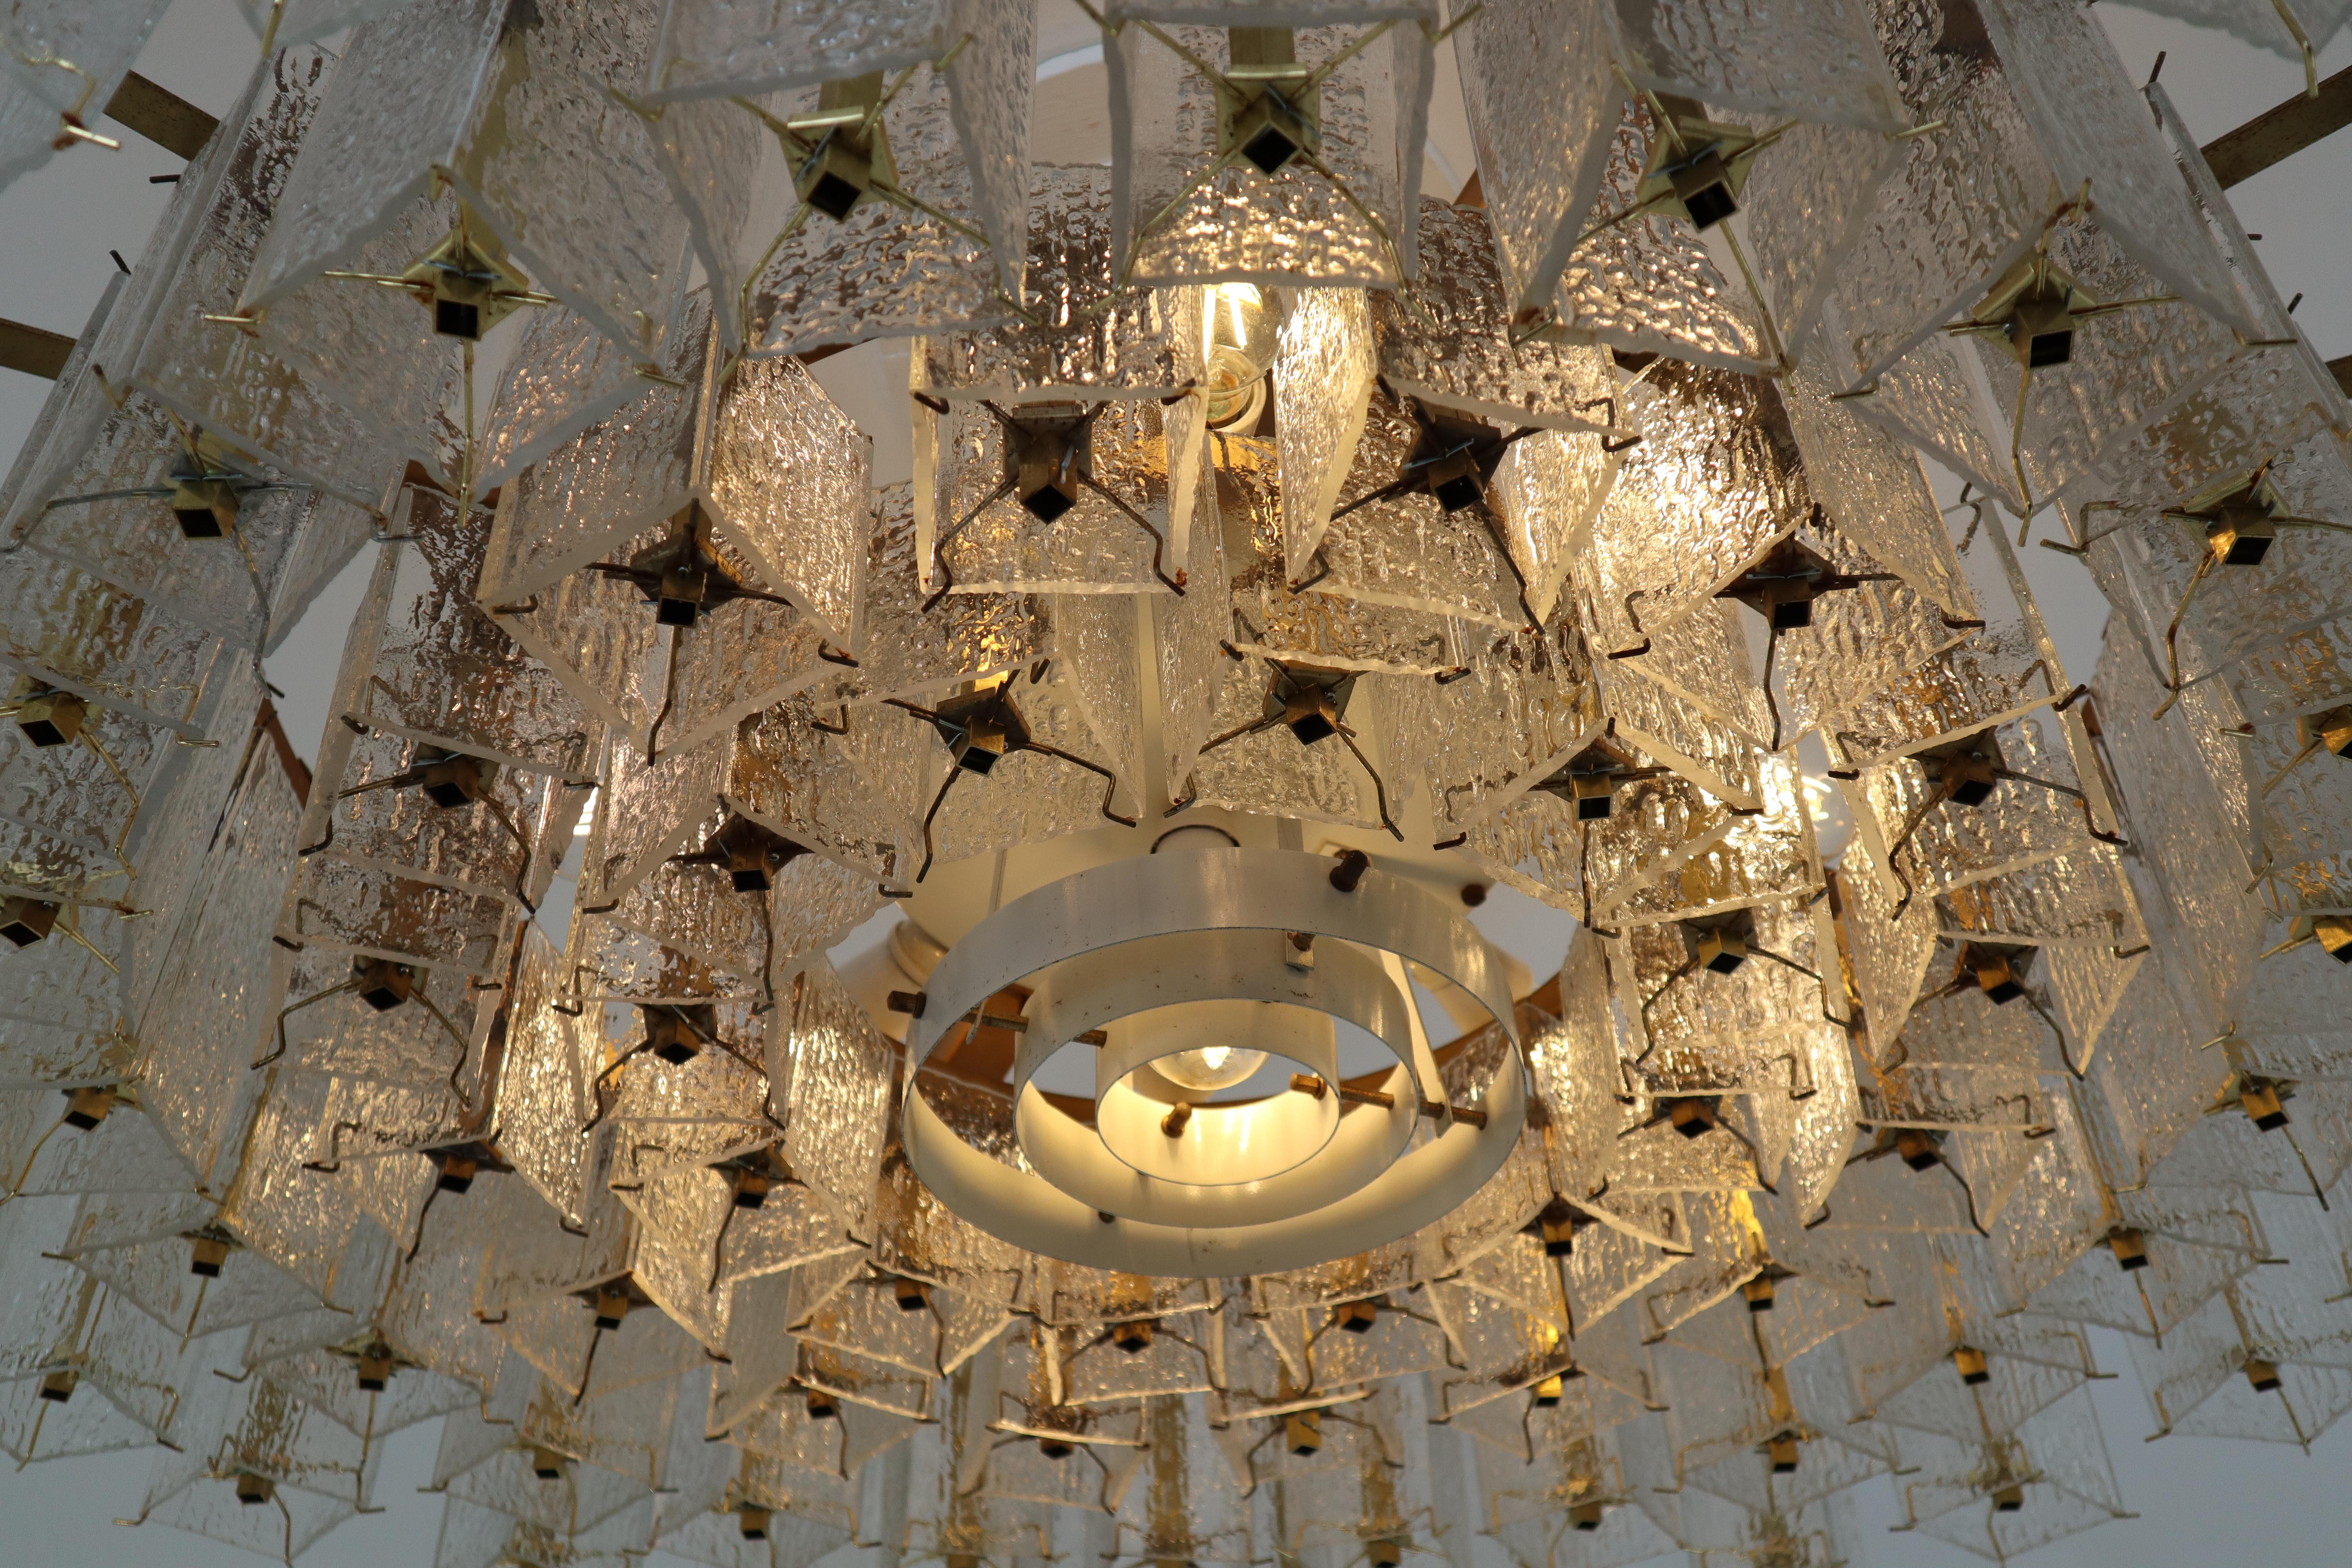 Extreme Large Midcentury Chandelier in Structured Glass and Brass from Europe (20. Jahrhundert)